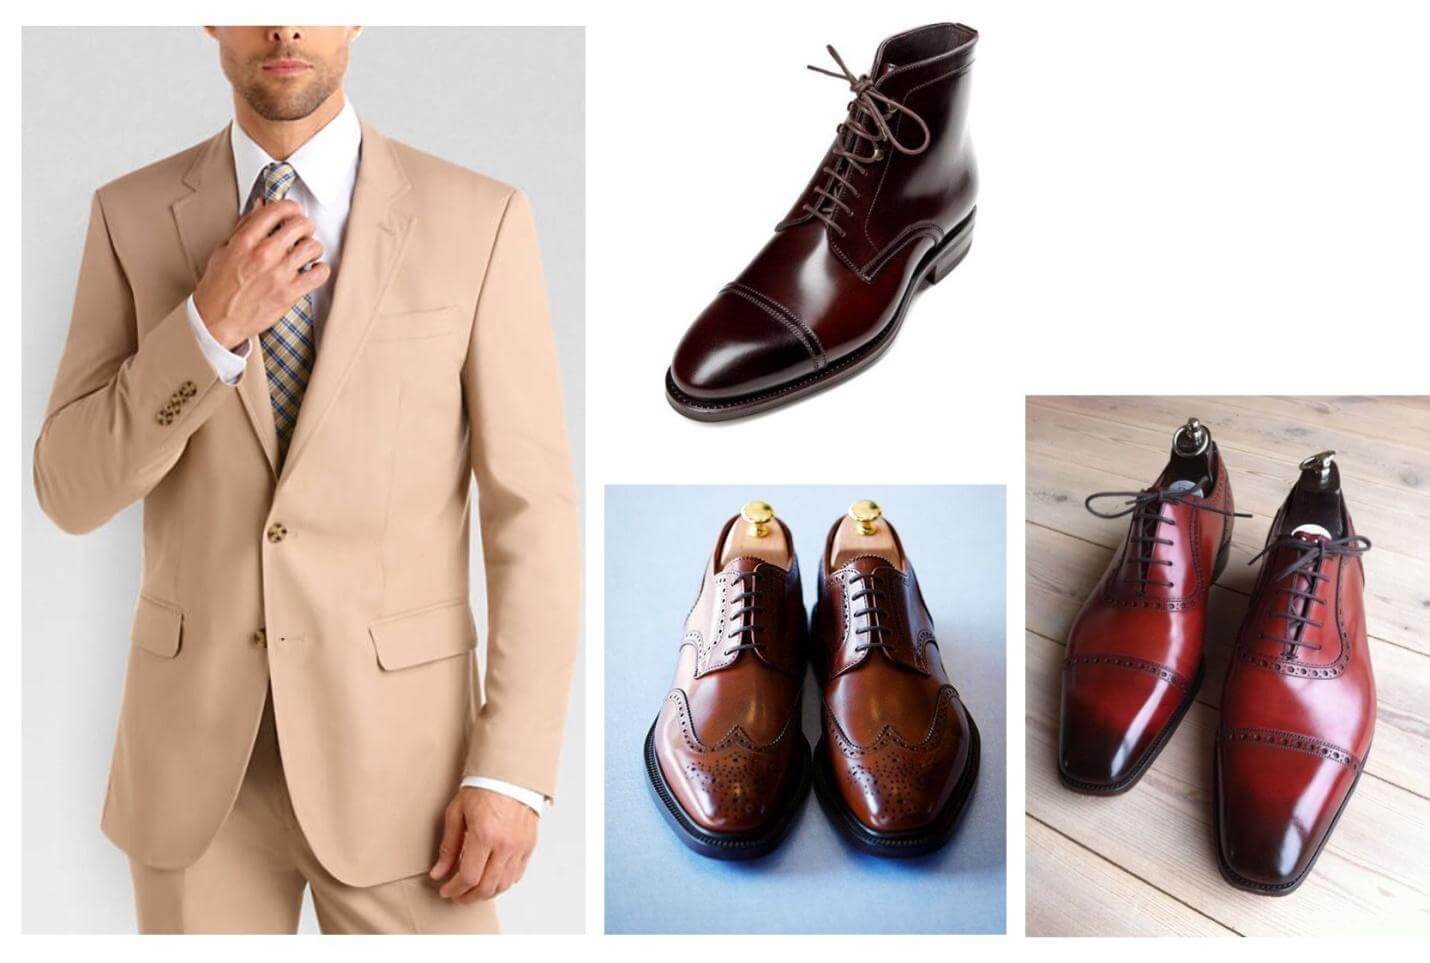 The Best Shoe Color To Match With Suits During Summer For Men